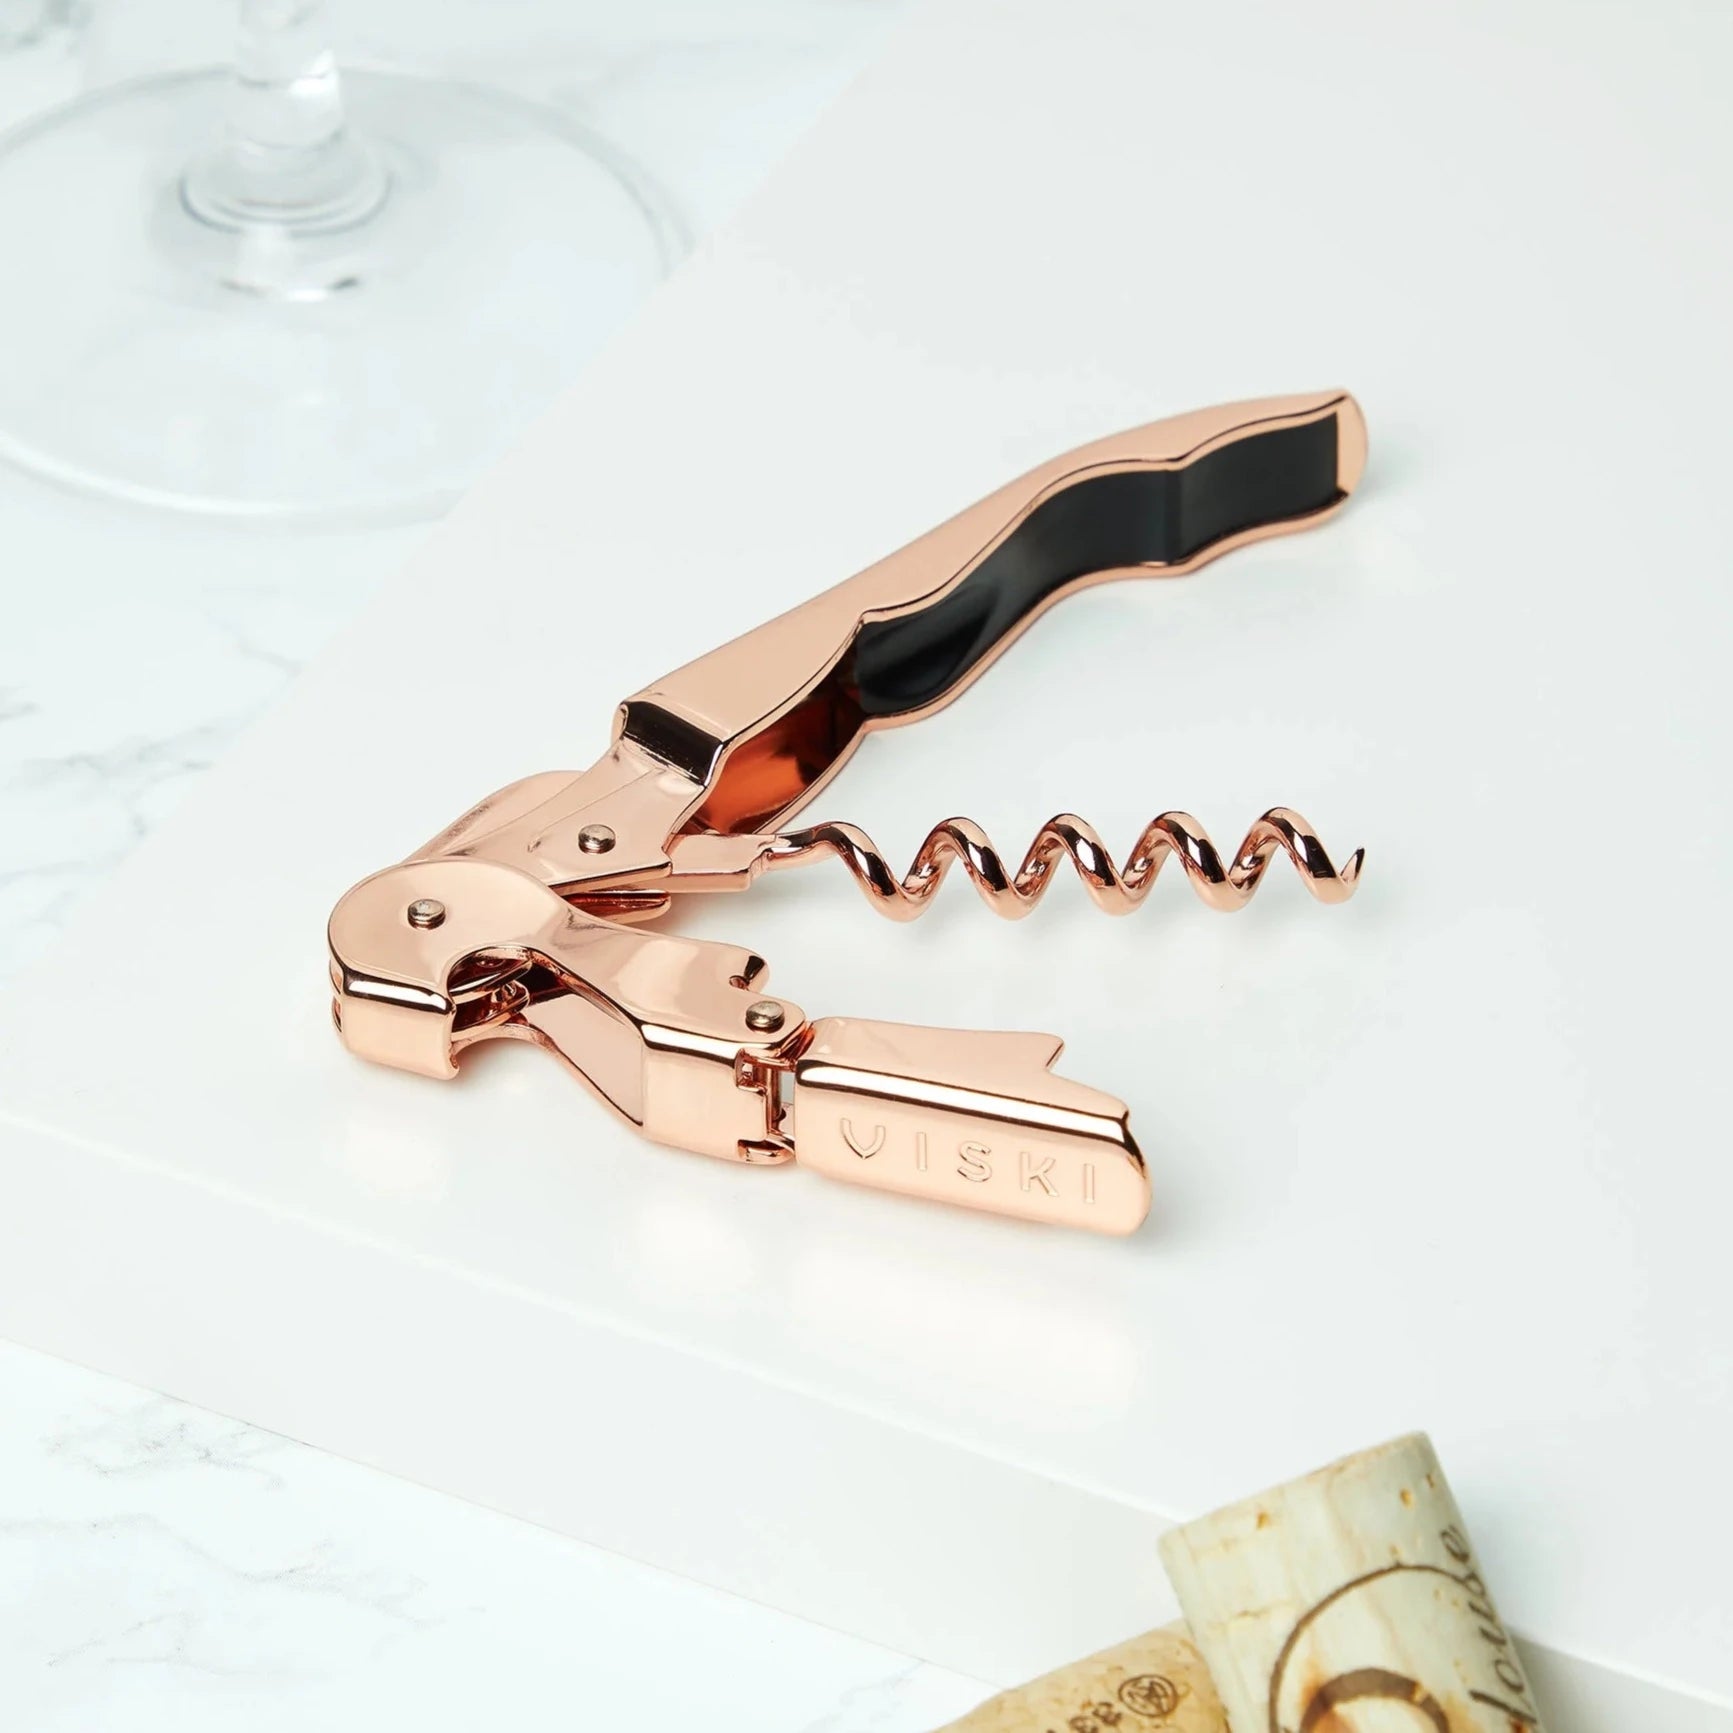 Copper Corkscrew on tray next to glass and corks